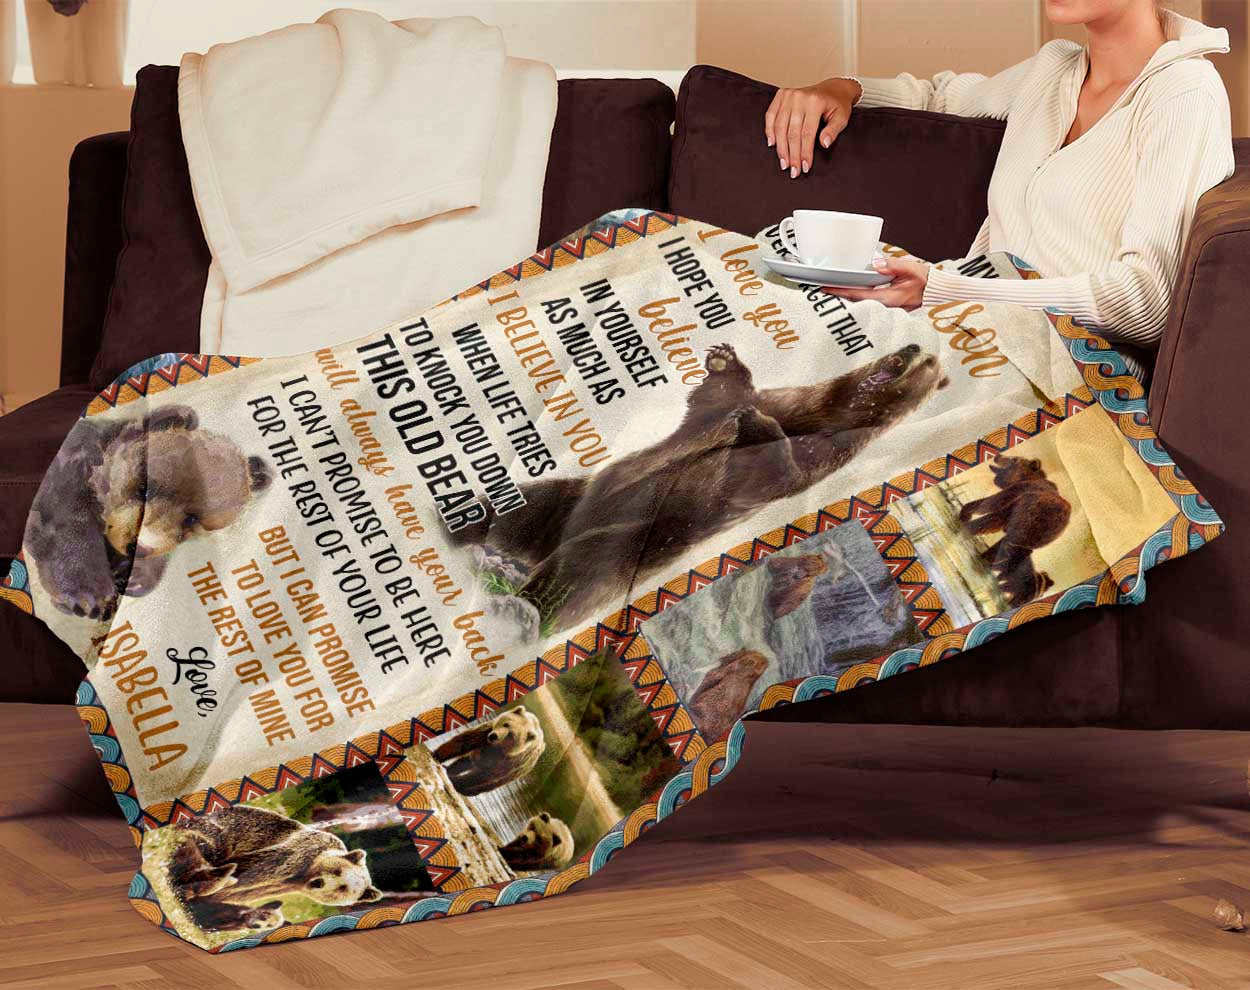 Personalized Custom Grandma Nana Grandpa Name To My Grandson This Old Bear Fleece Throw Sherpa Blanket Twin Queen Size Christmas Birthday Tapestry Wall Hanging